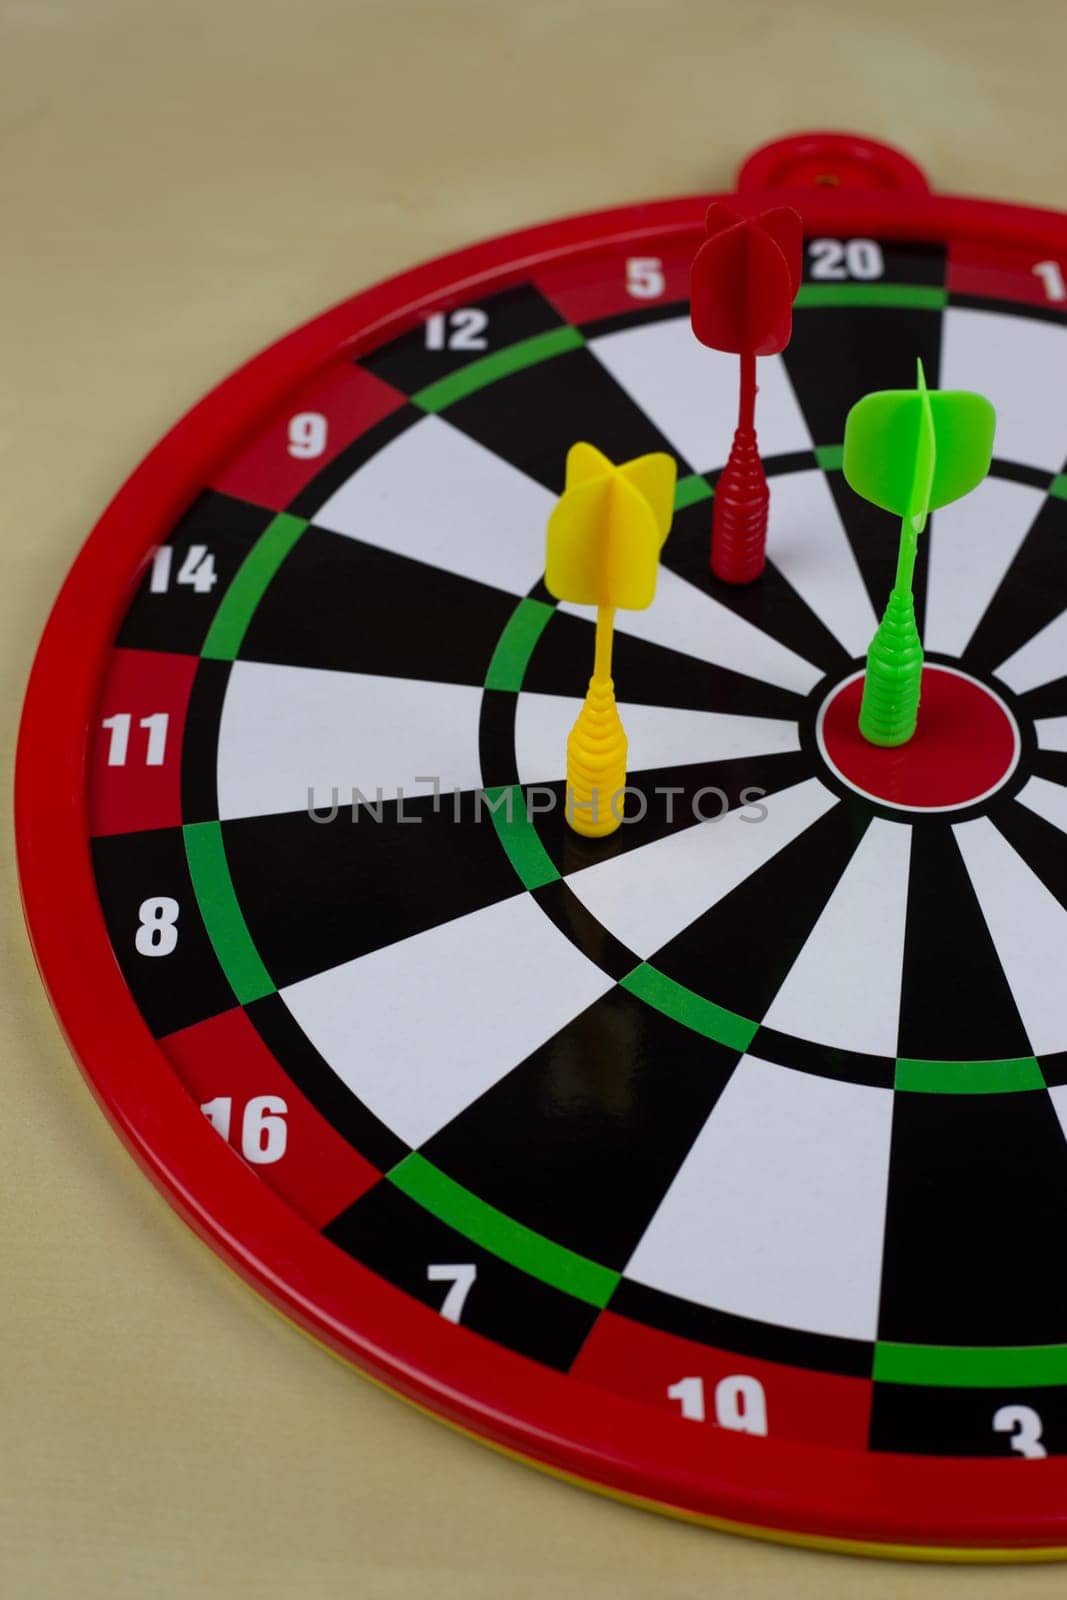 Magnetic darts for safe play for children by timurmalazoniia